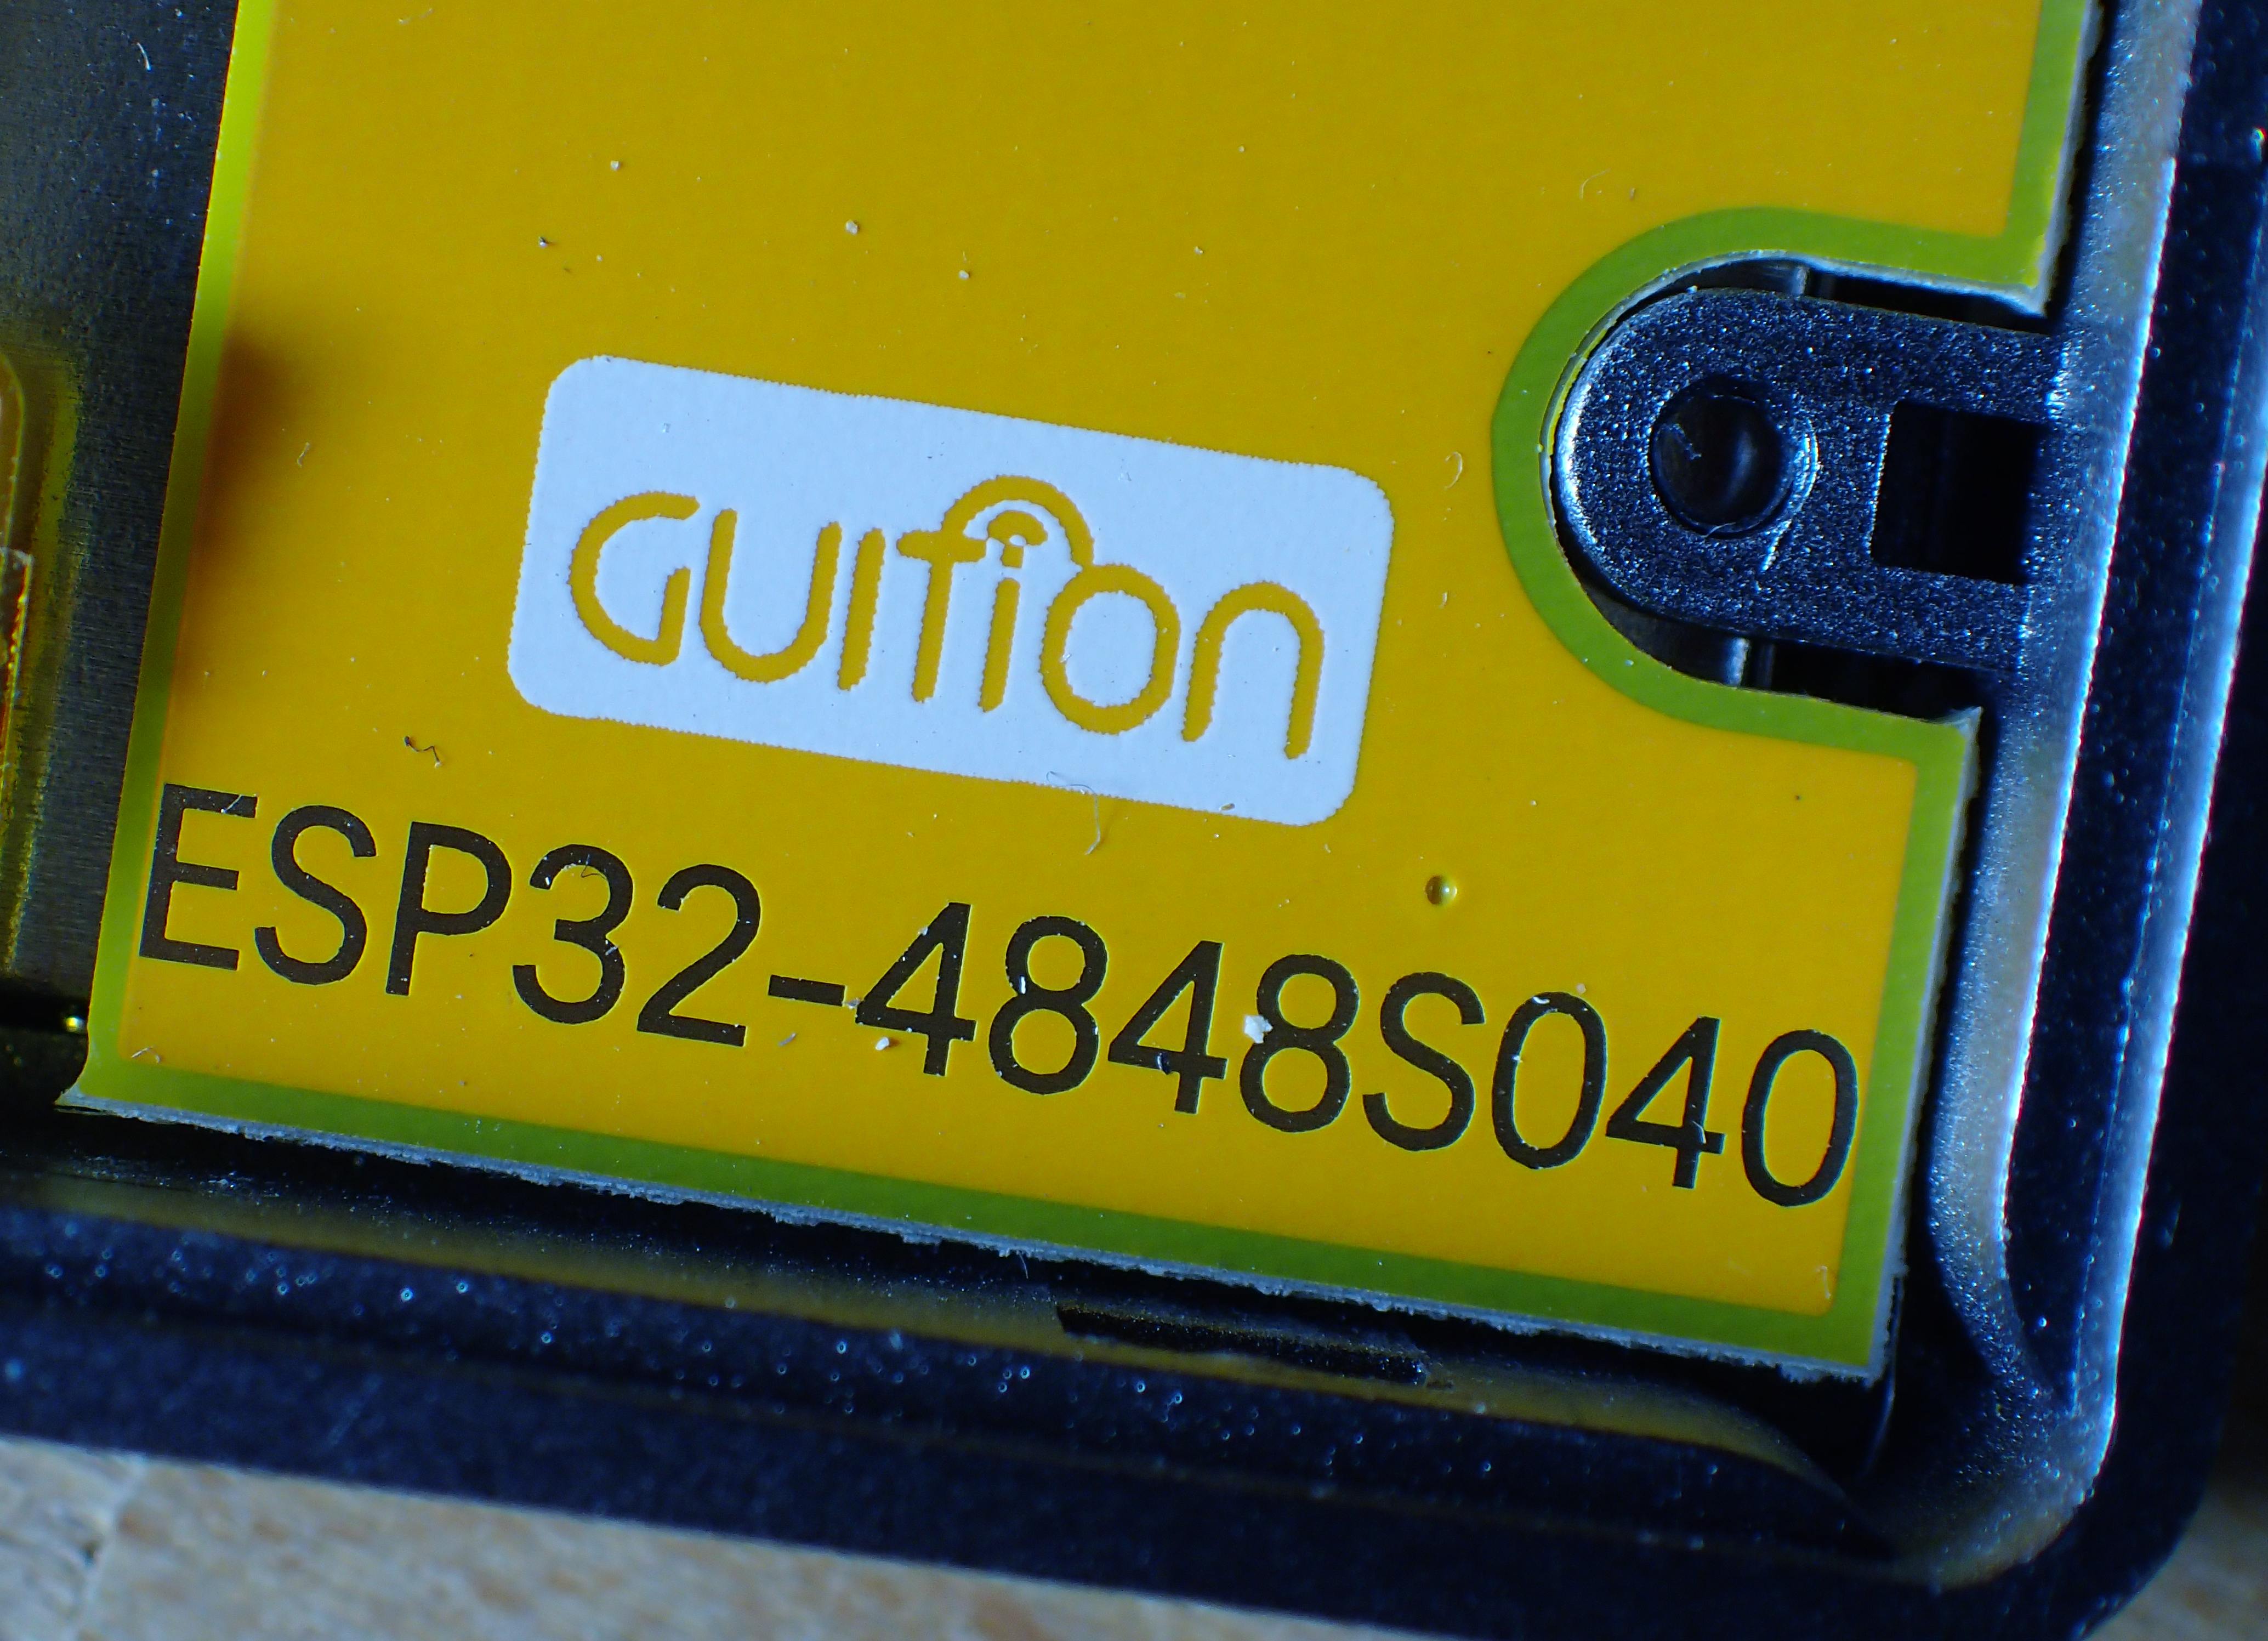 Guition 4848S040